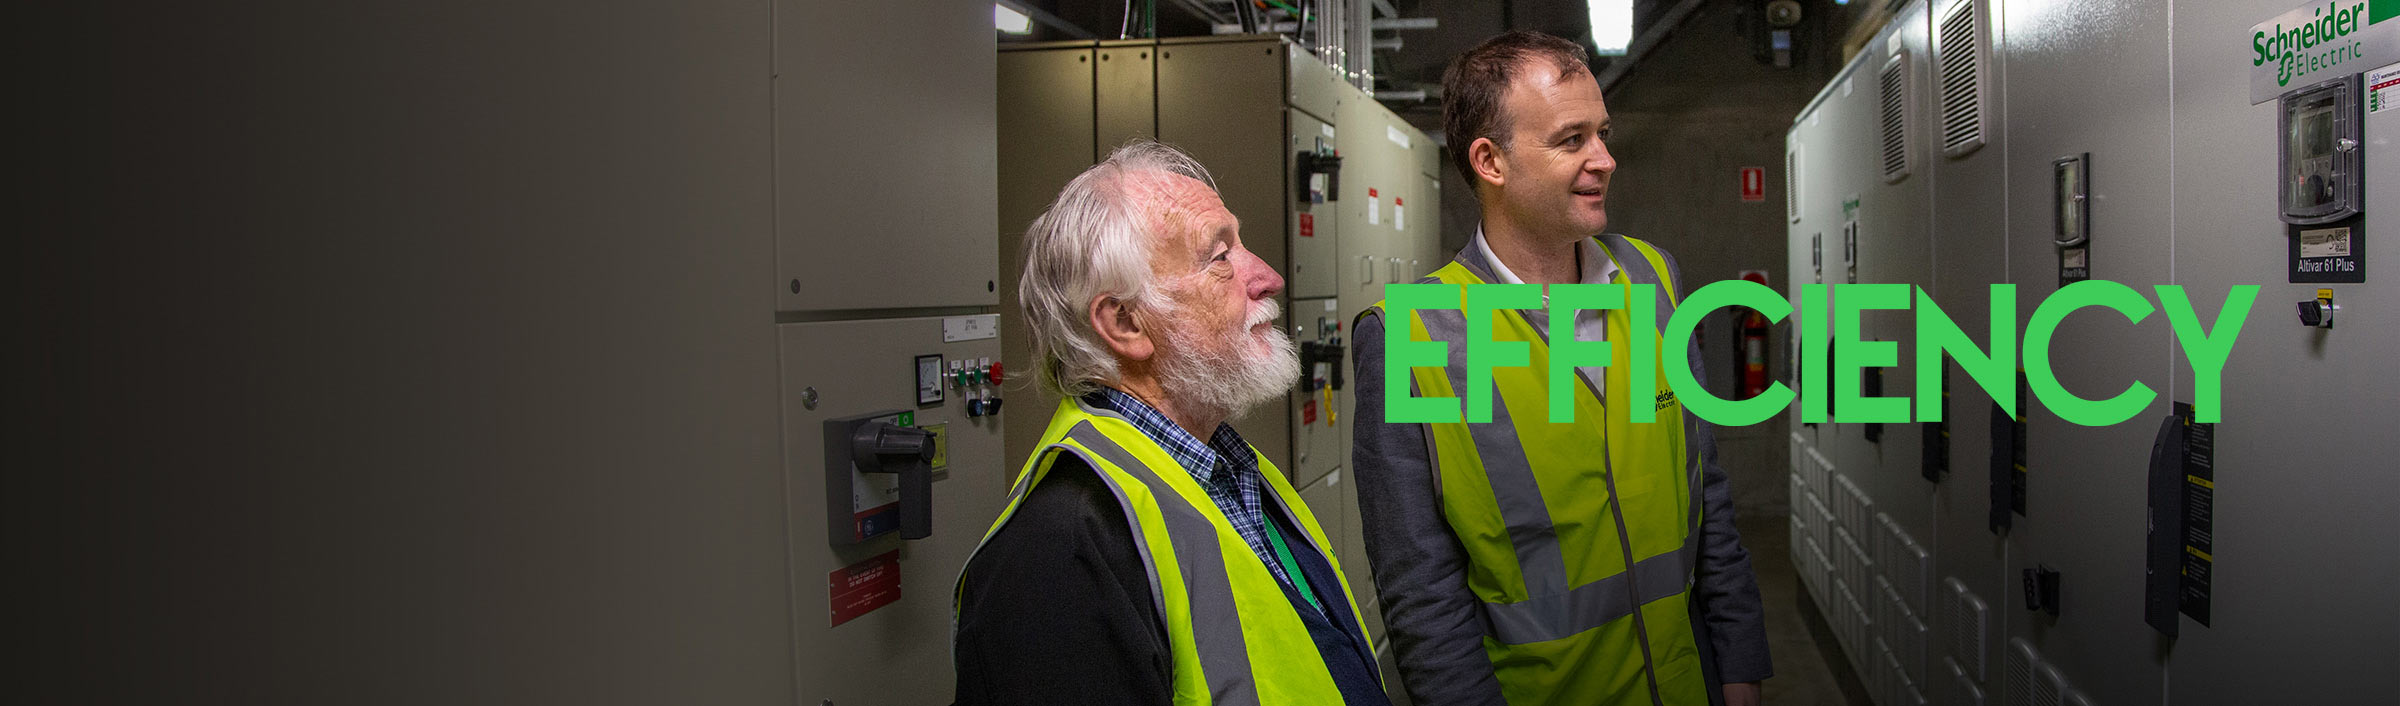 EastLink cuts energy use 70% with IoT and EcoStruxure Schneider Electric Global